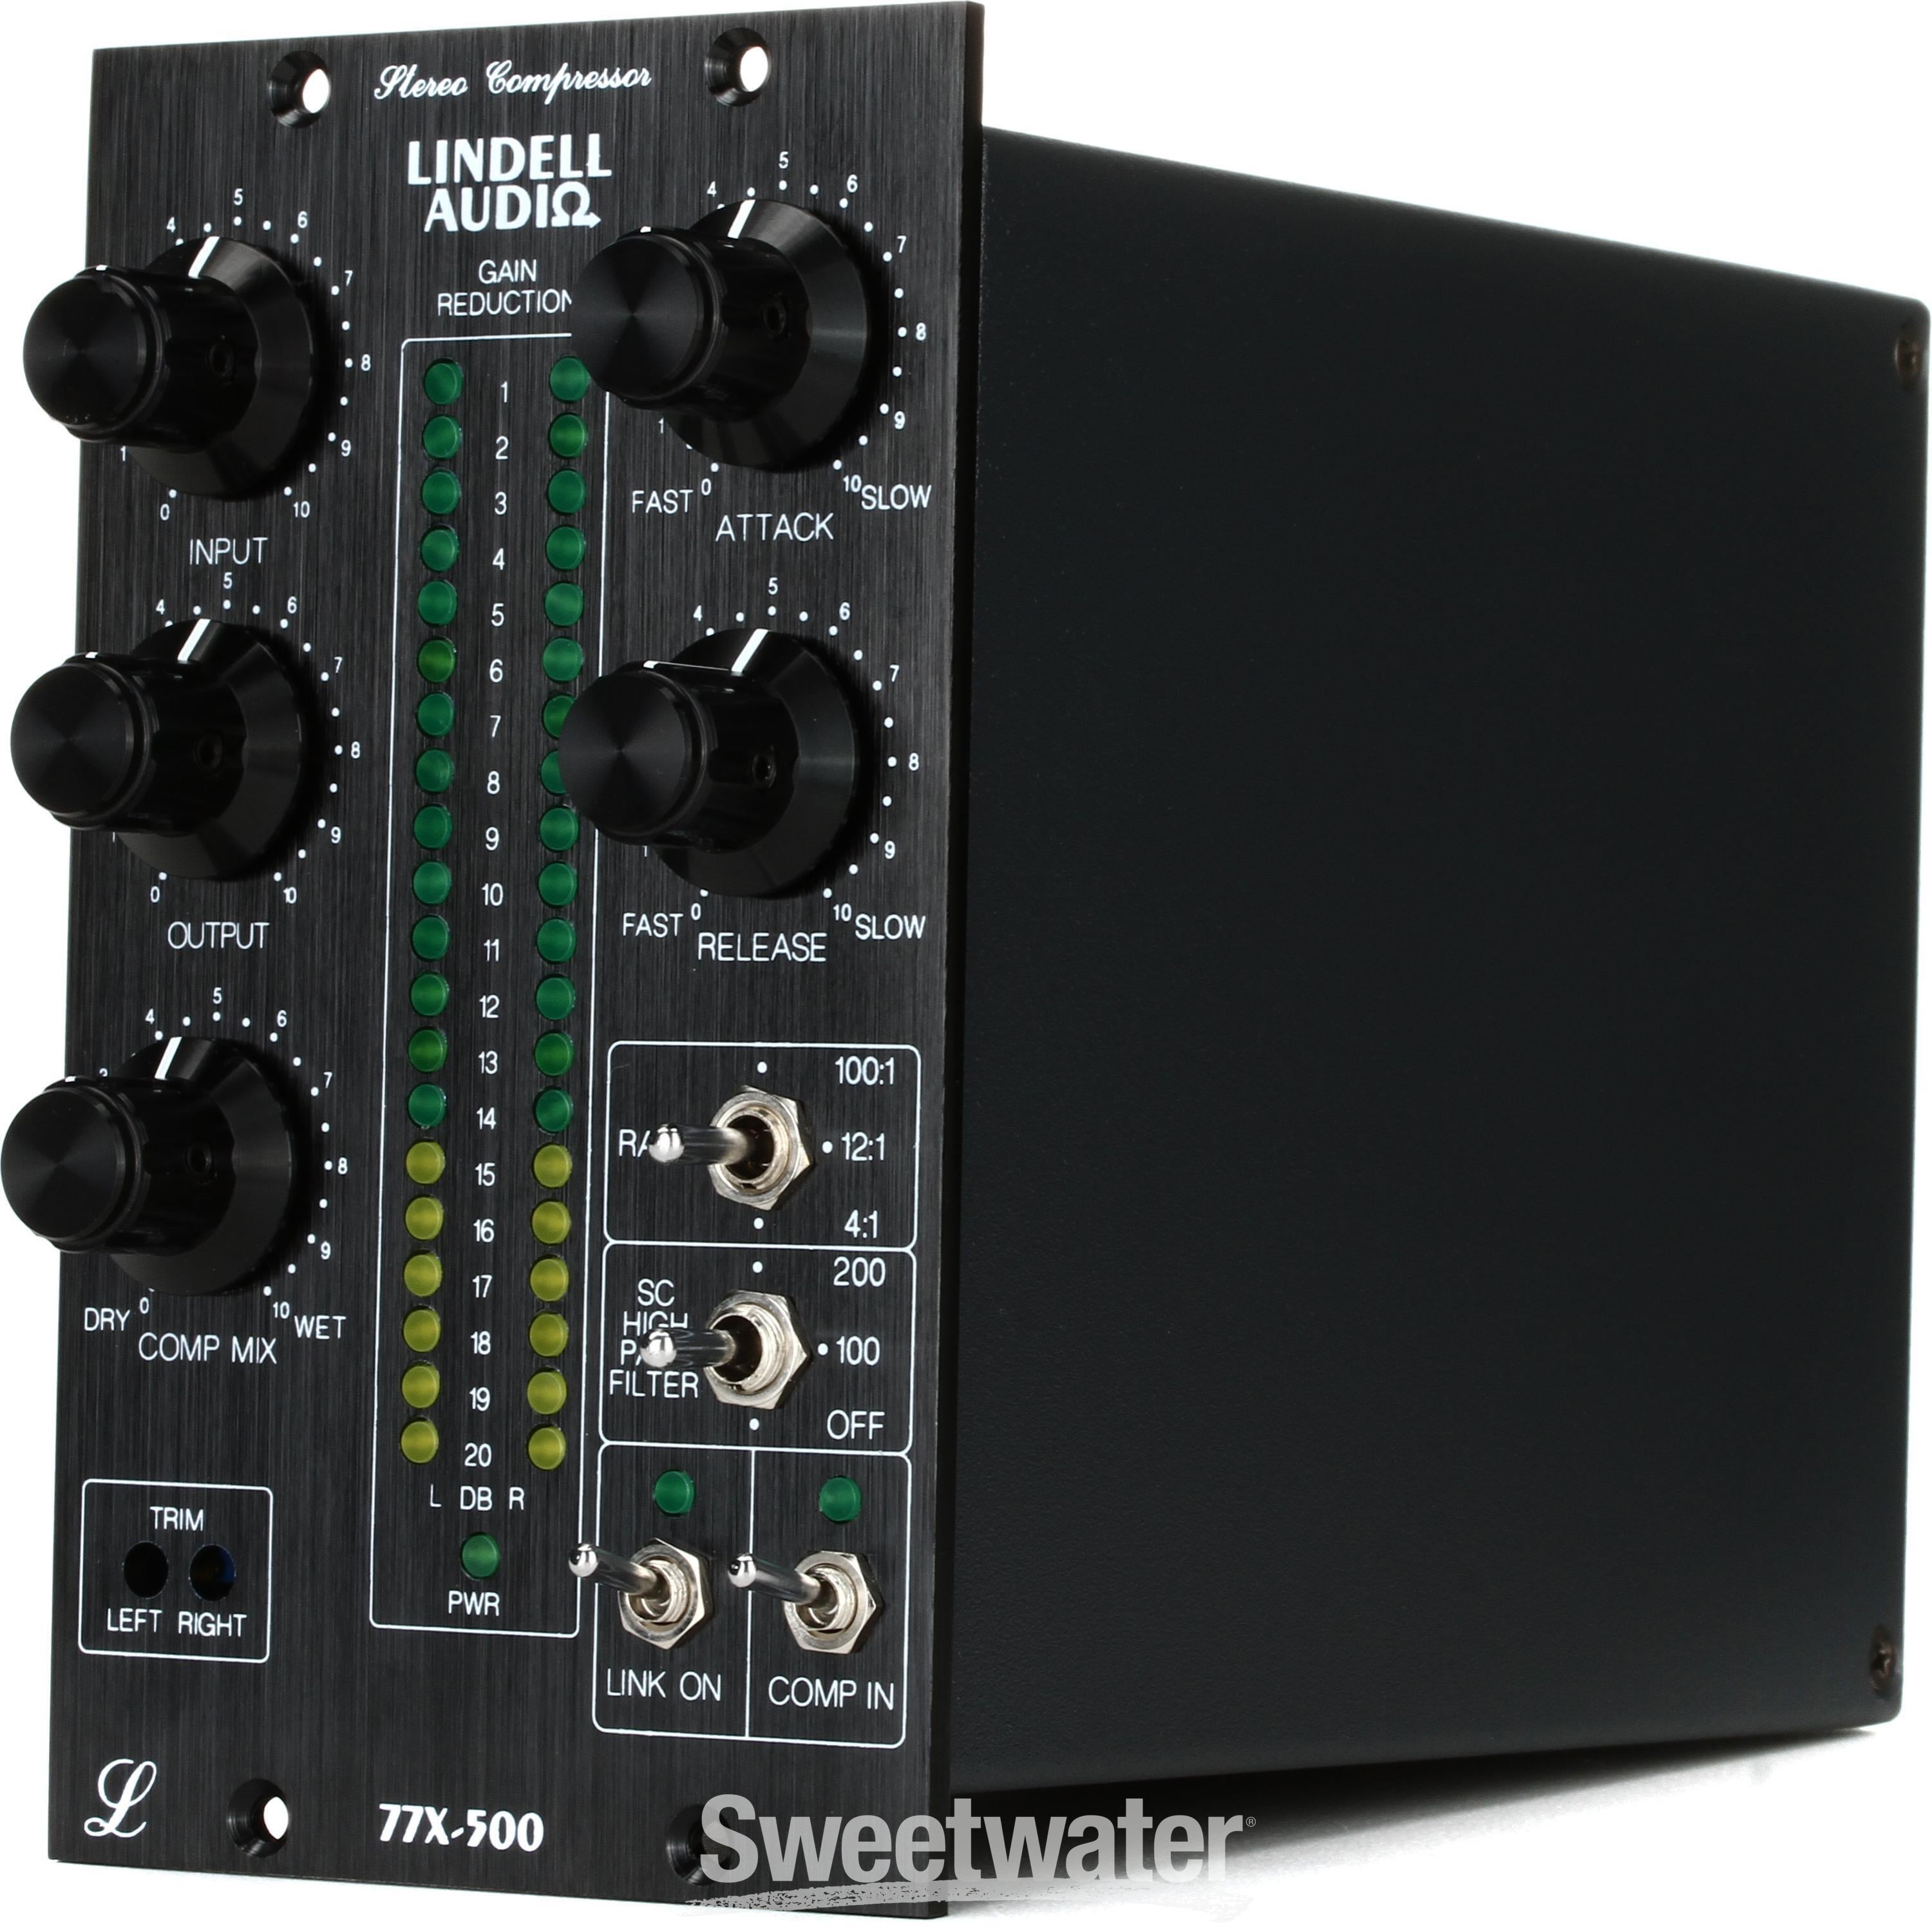 Lindell Audio 77X 500 Series Stereo Compressor/Limiter | Sweetwater